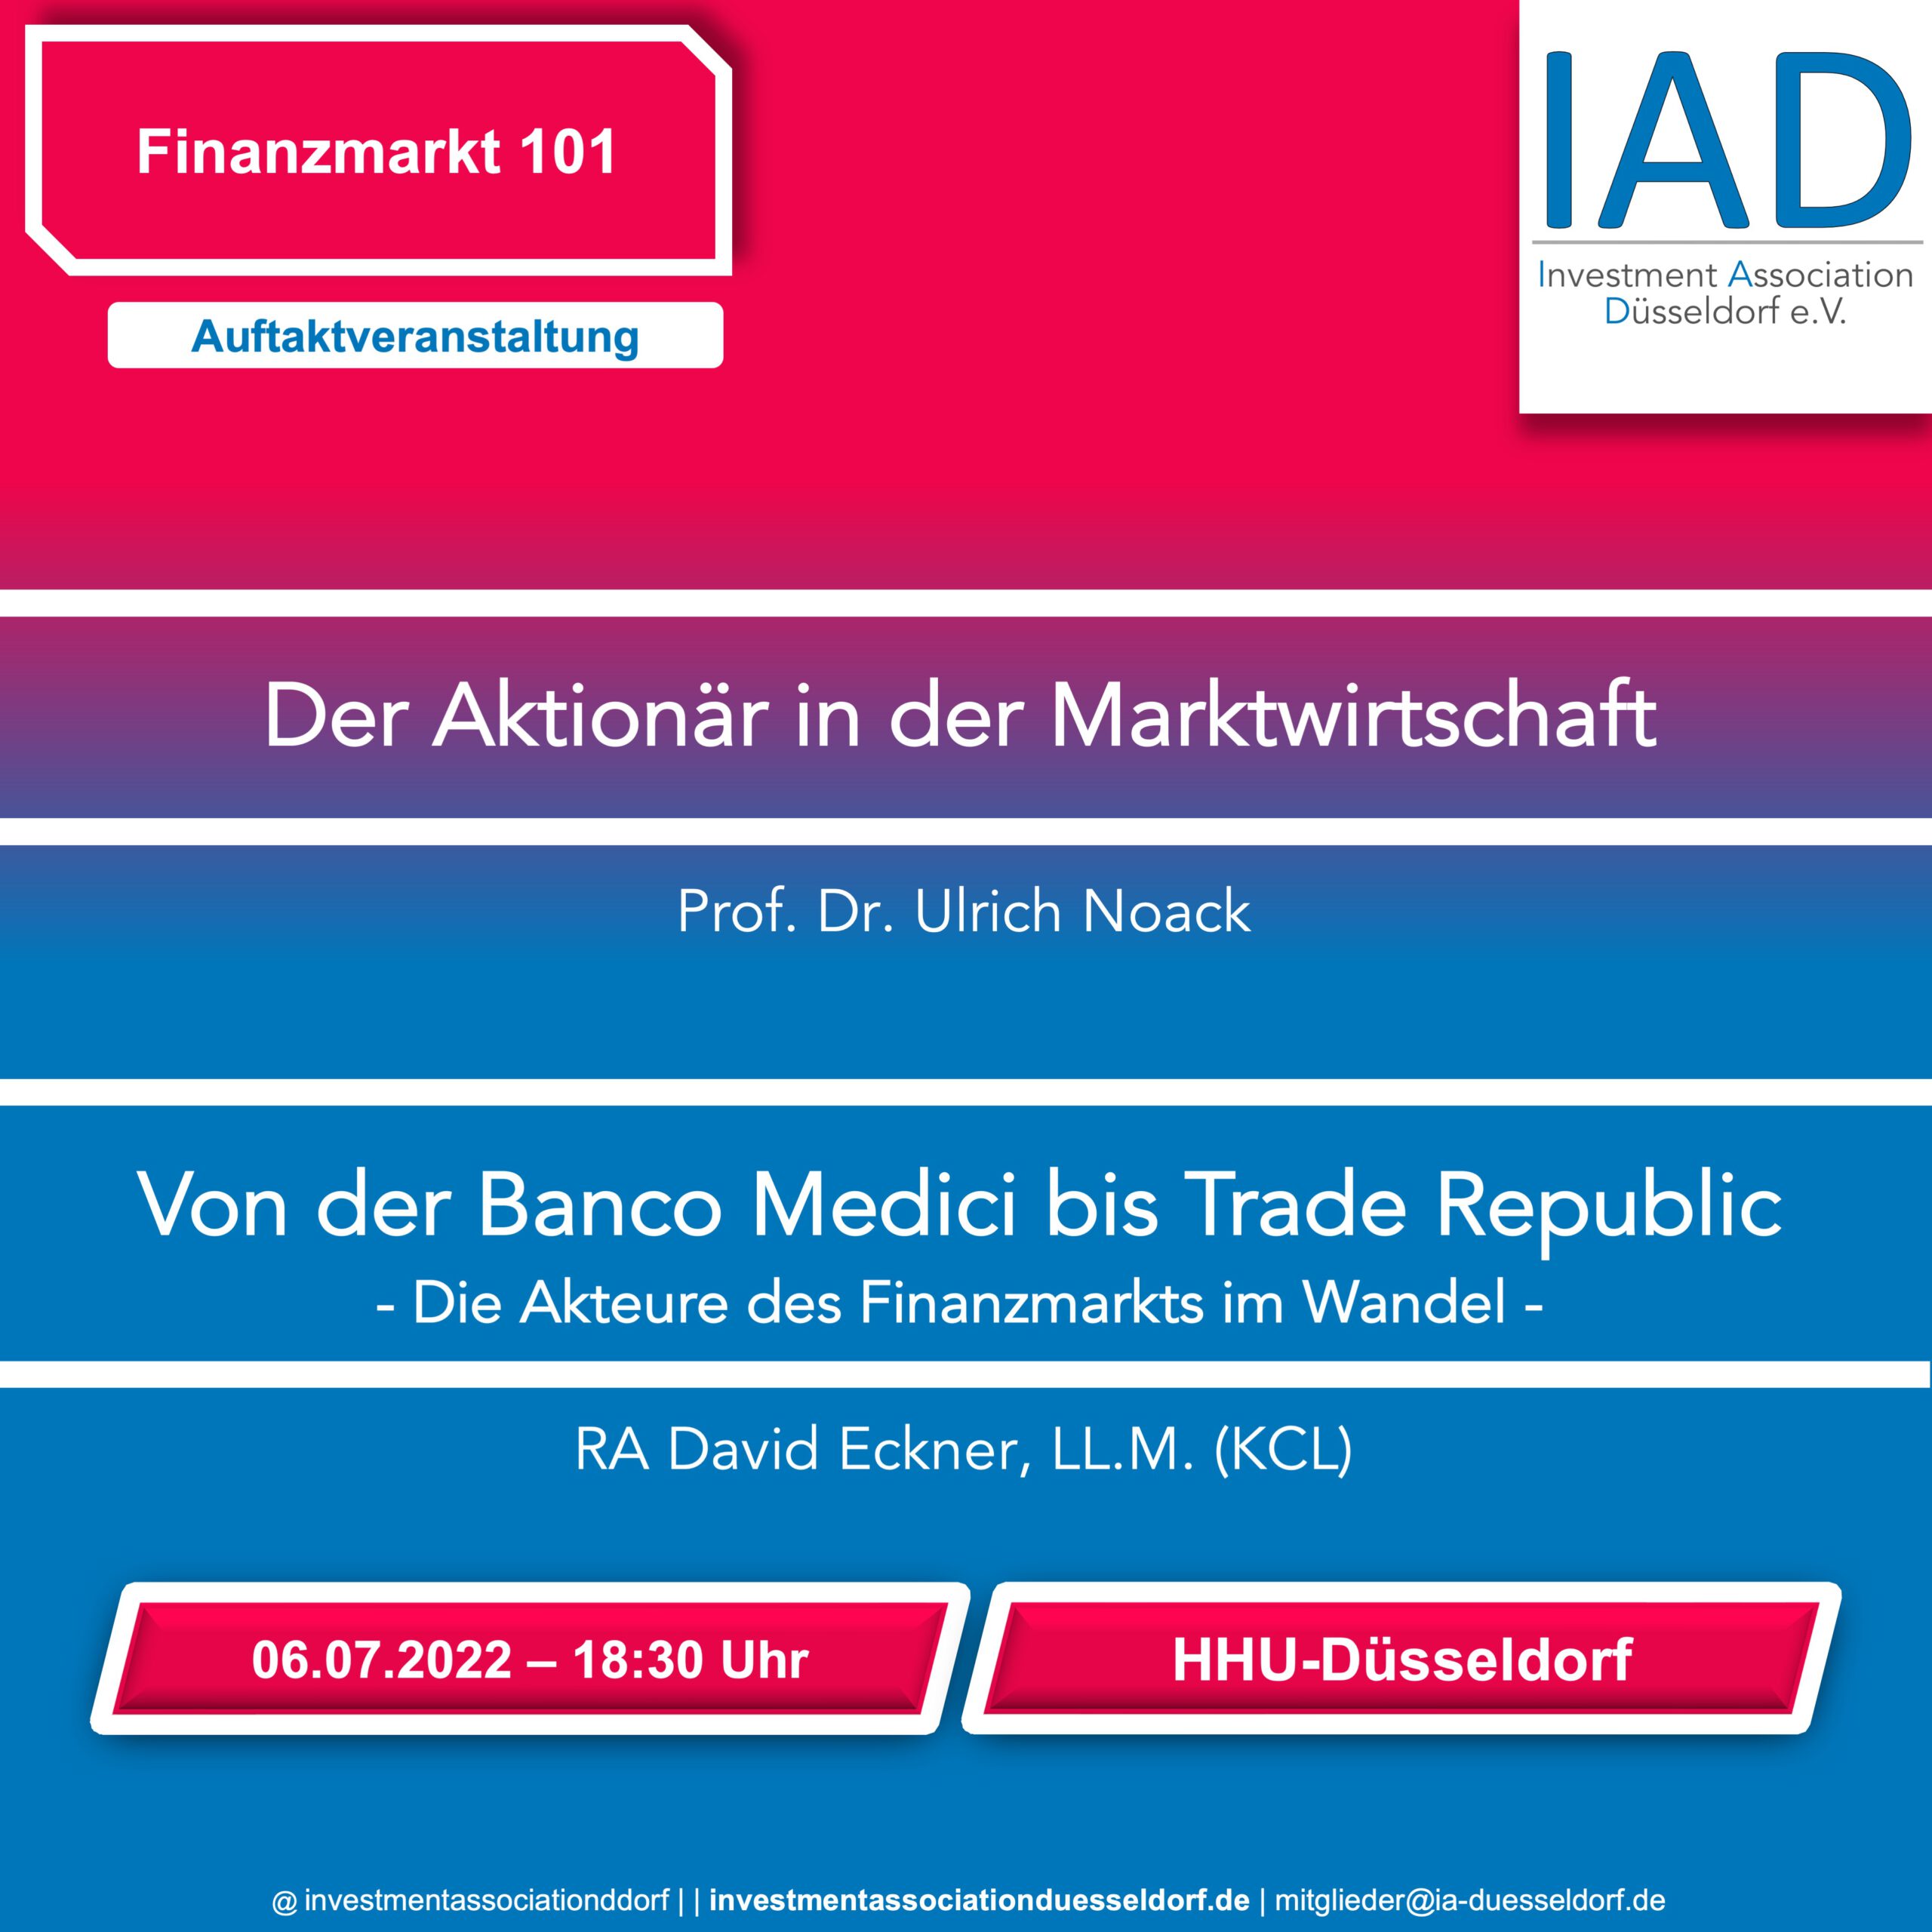 You are currently viewing Finanzmarkt 101 (06.07.2022 – 18:30)